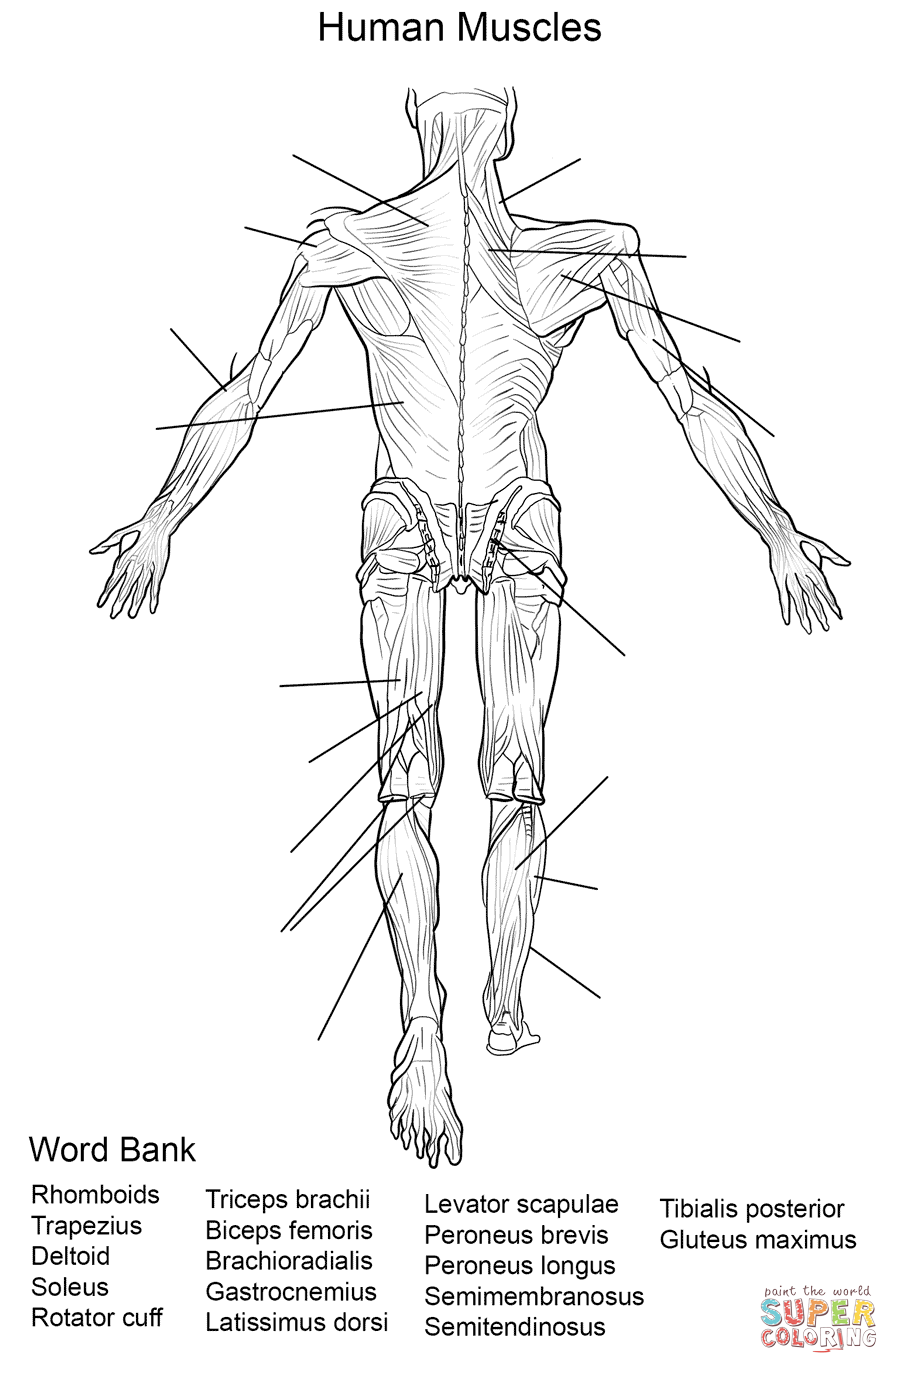 Human Anatomy Muscles Coloring Pages Printable Image